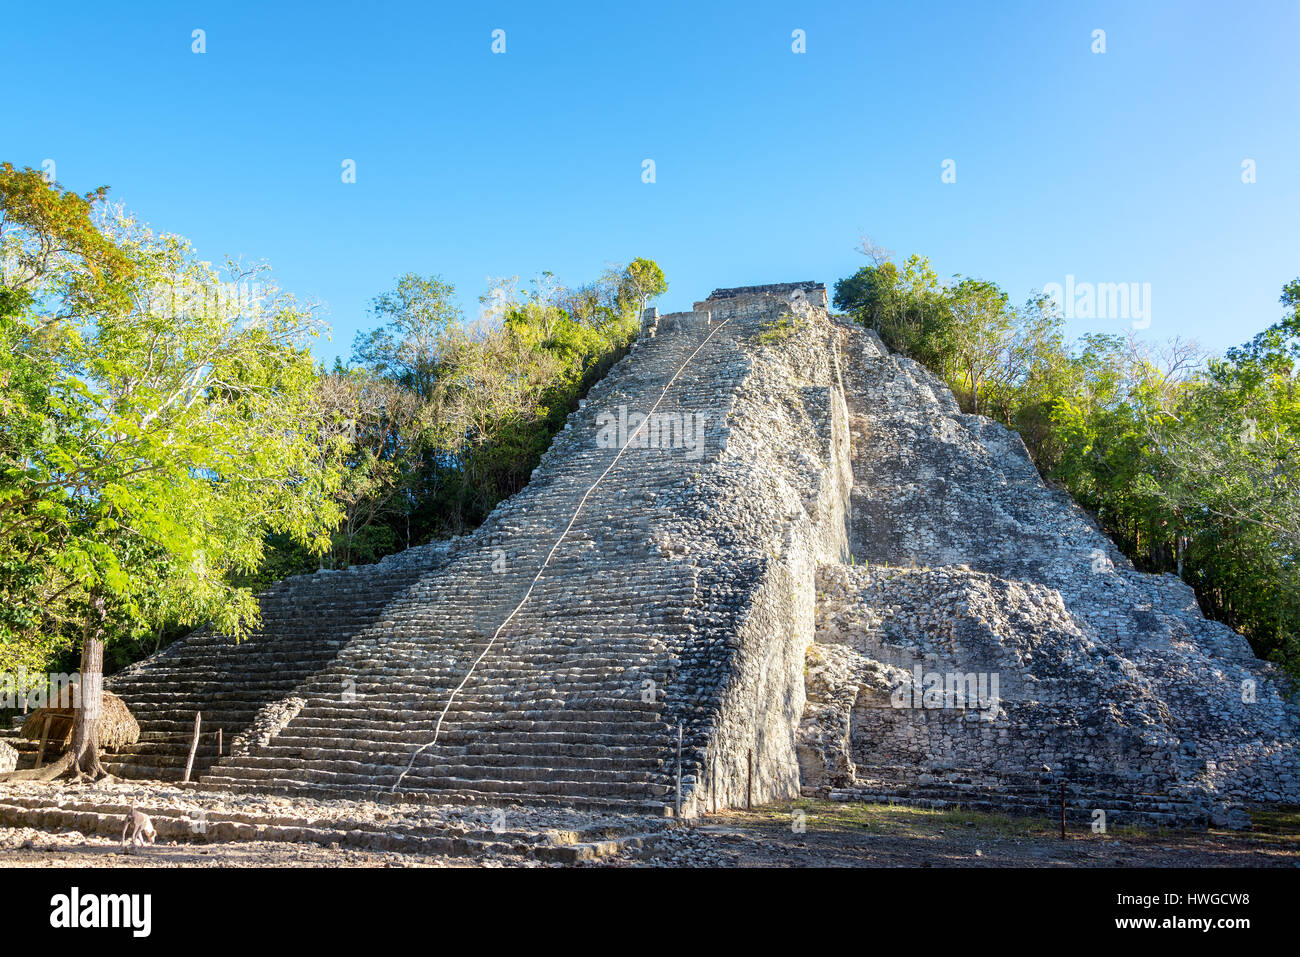 Pyramid of the Mayan ruins of Coba, Mexico.  The name of the pyramid is Nohoch Mul Stock Photo